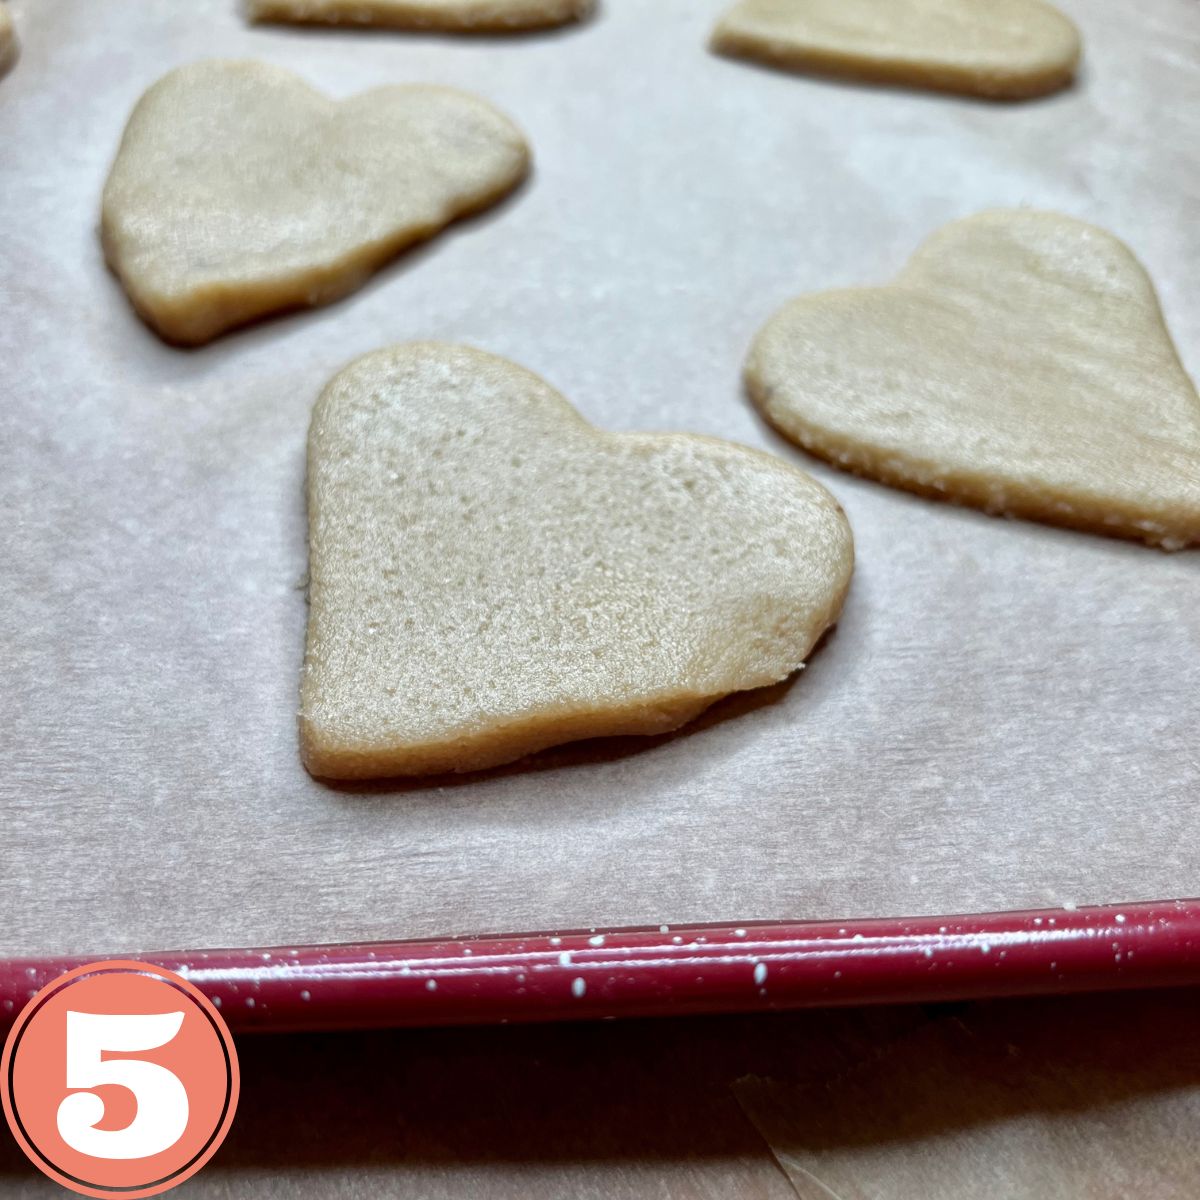 Heart shaped cookie dough on a baking sheet lined with parchment paper